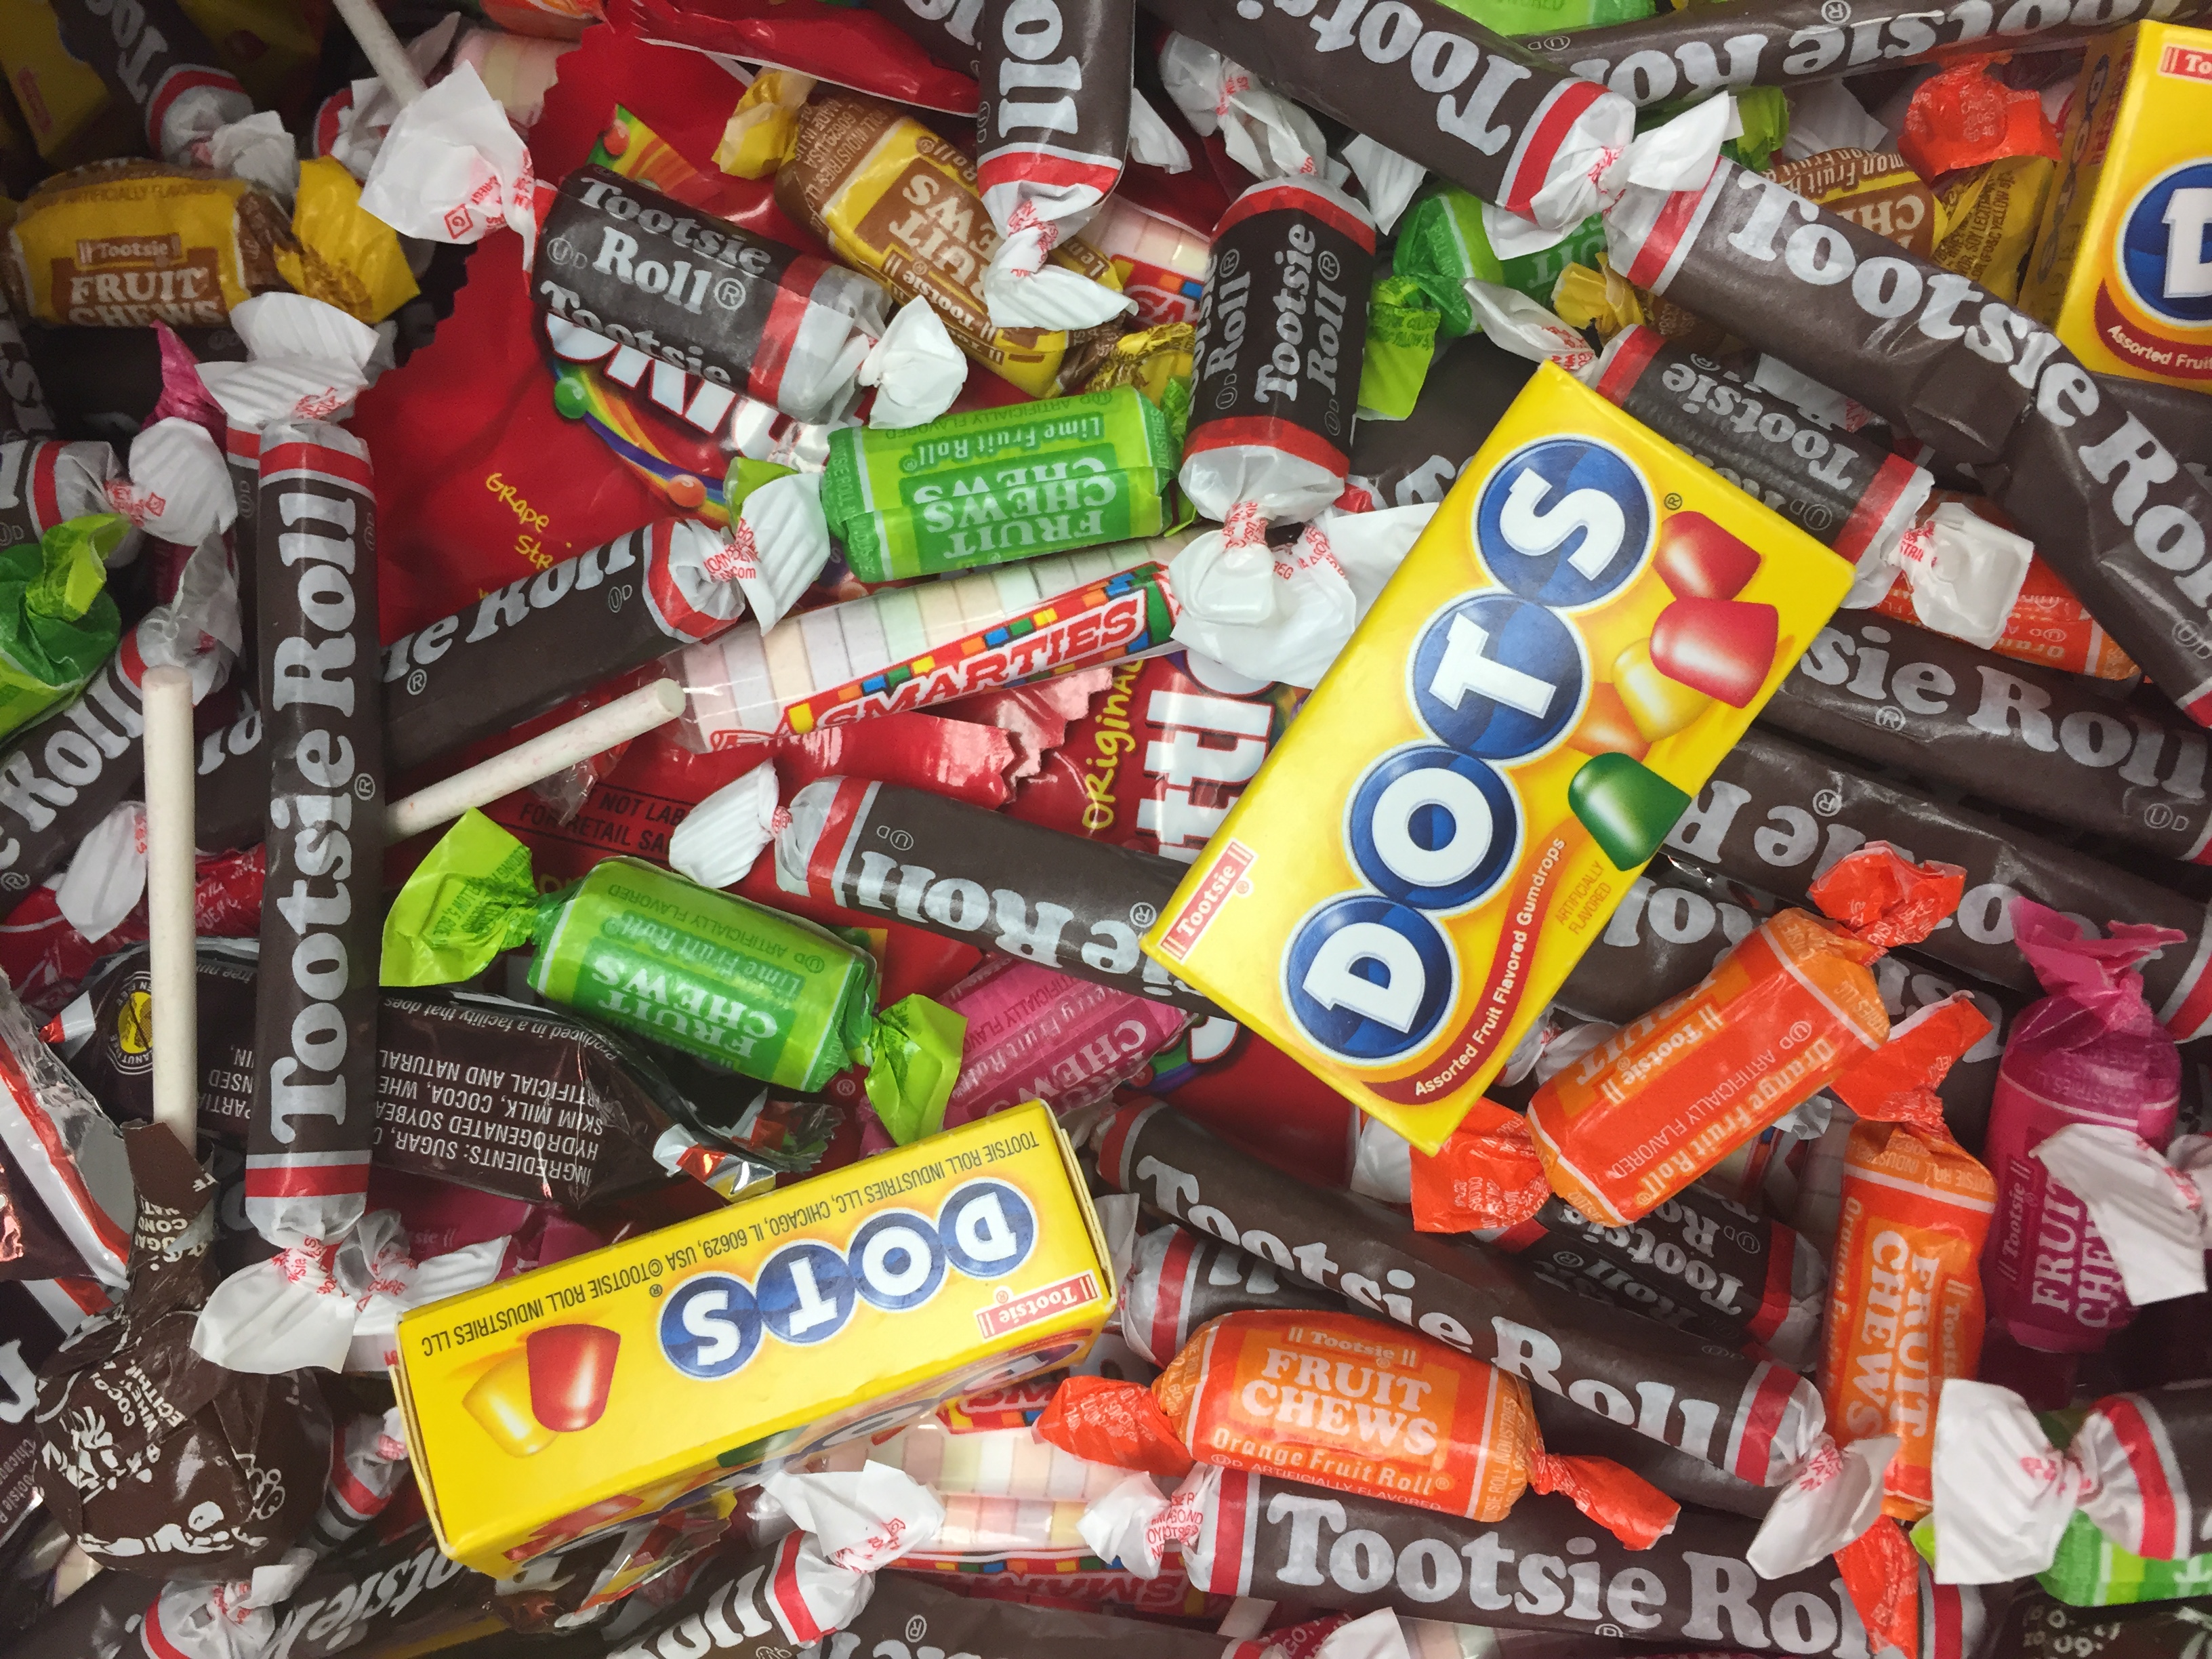 UA Professor Says Seeing Candy Causes Narrowed Focus